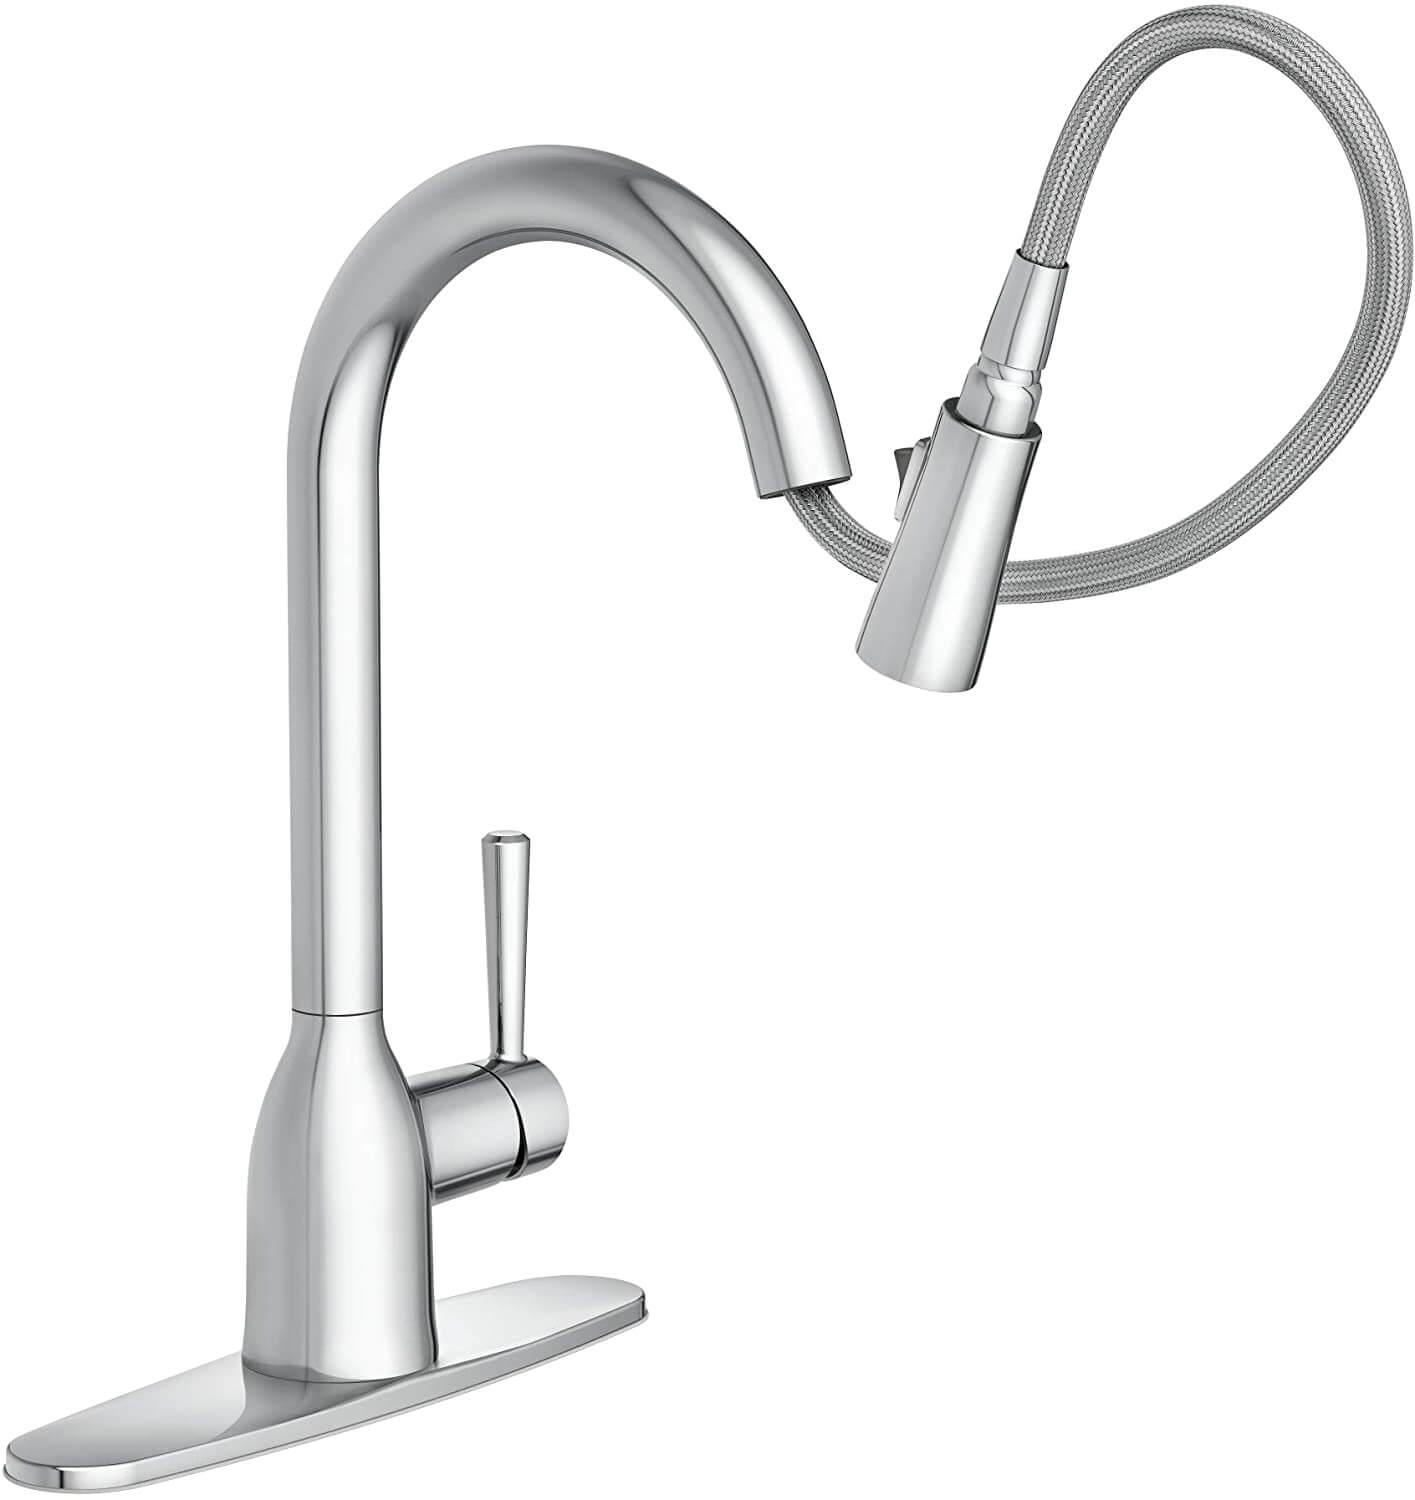 wowow-single-handle-high-arc-chrome-pull-down-kitchen-faucet (8)